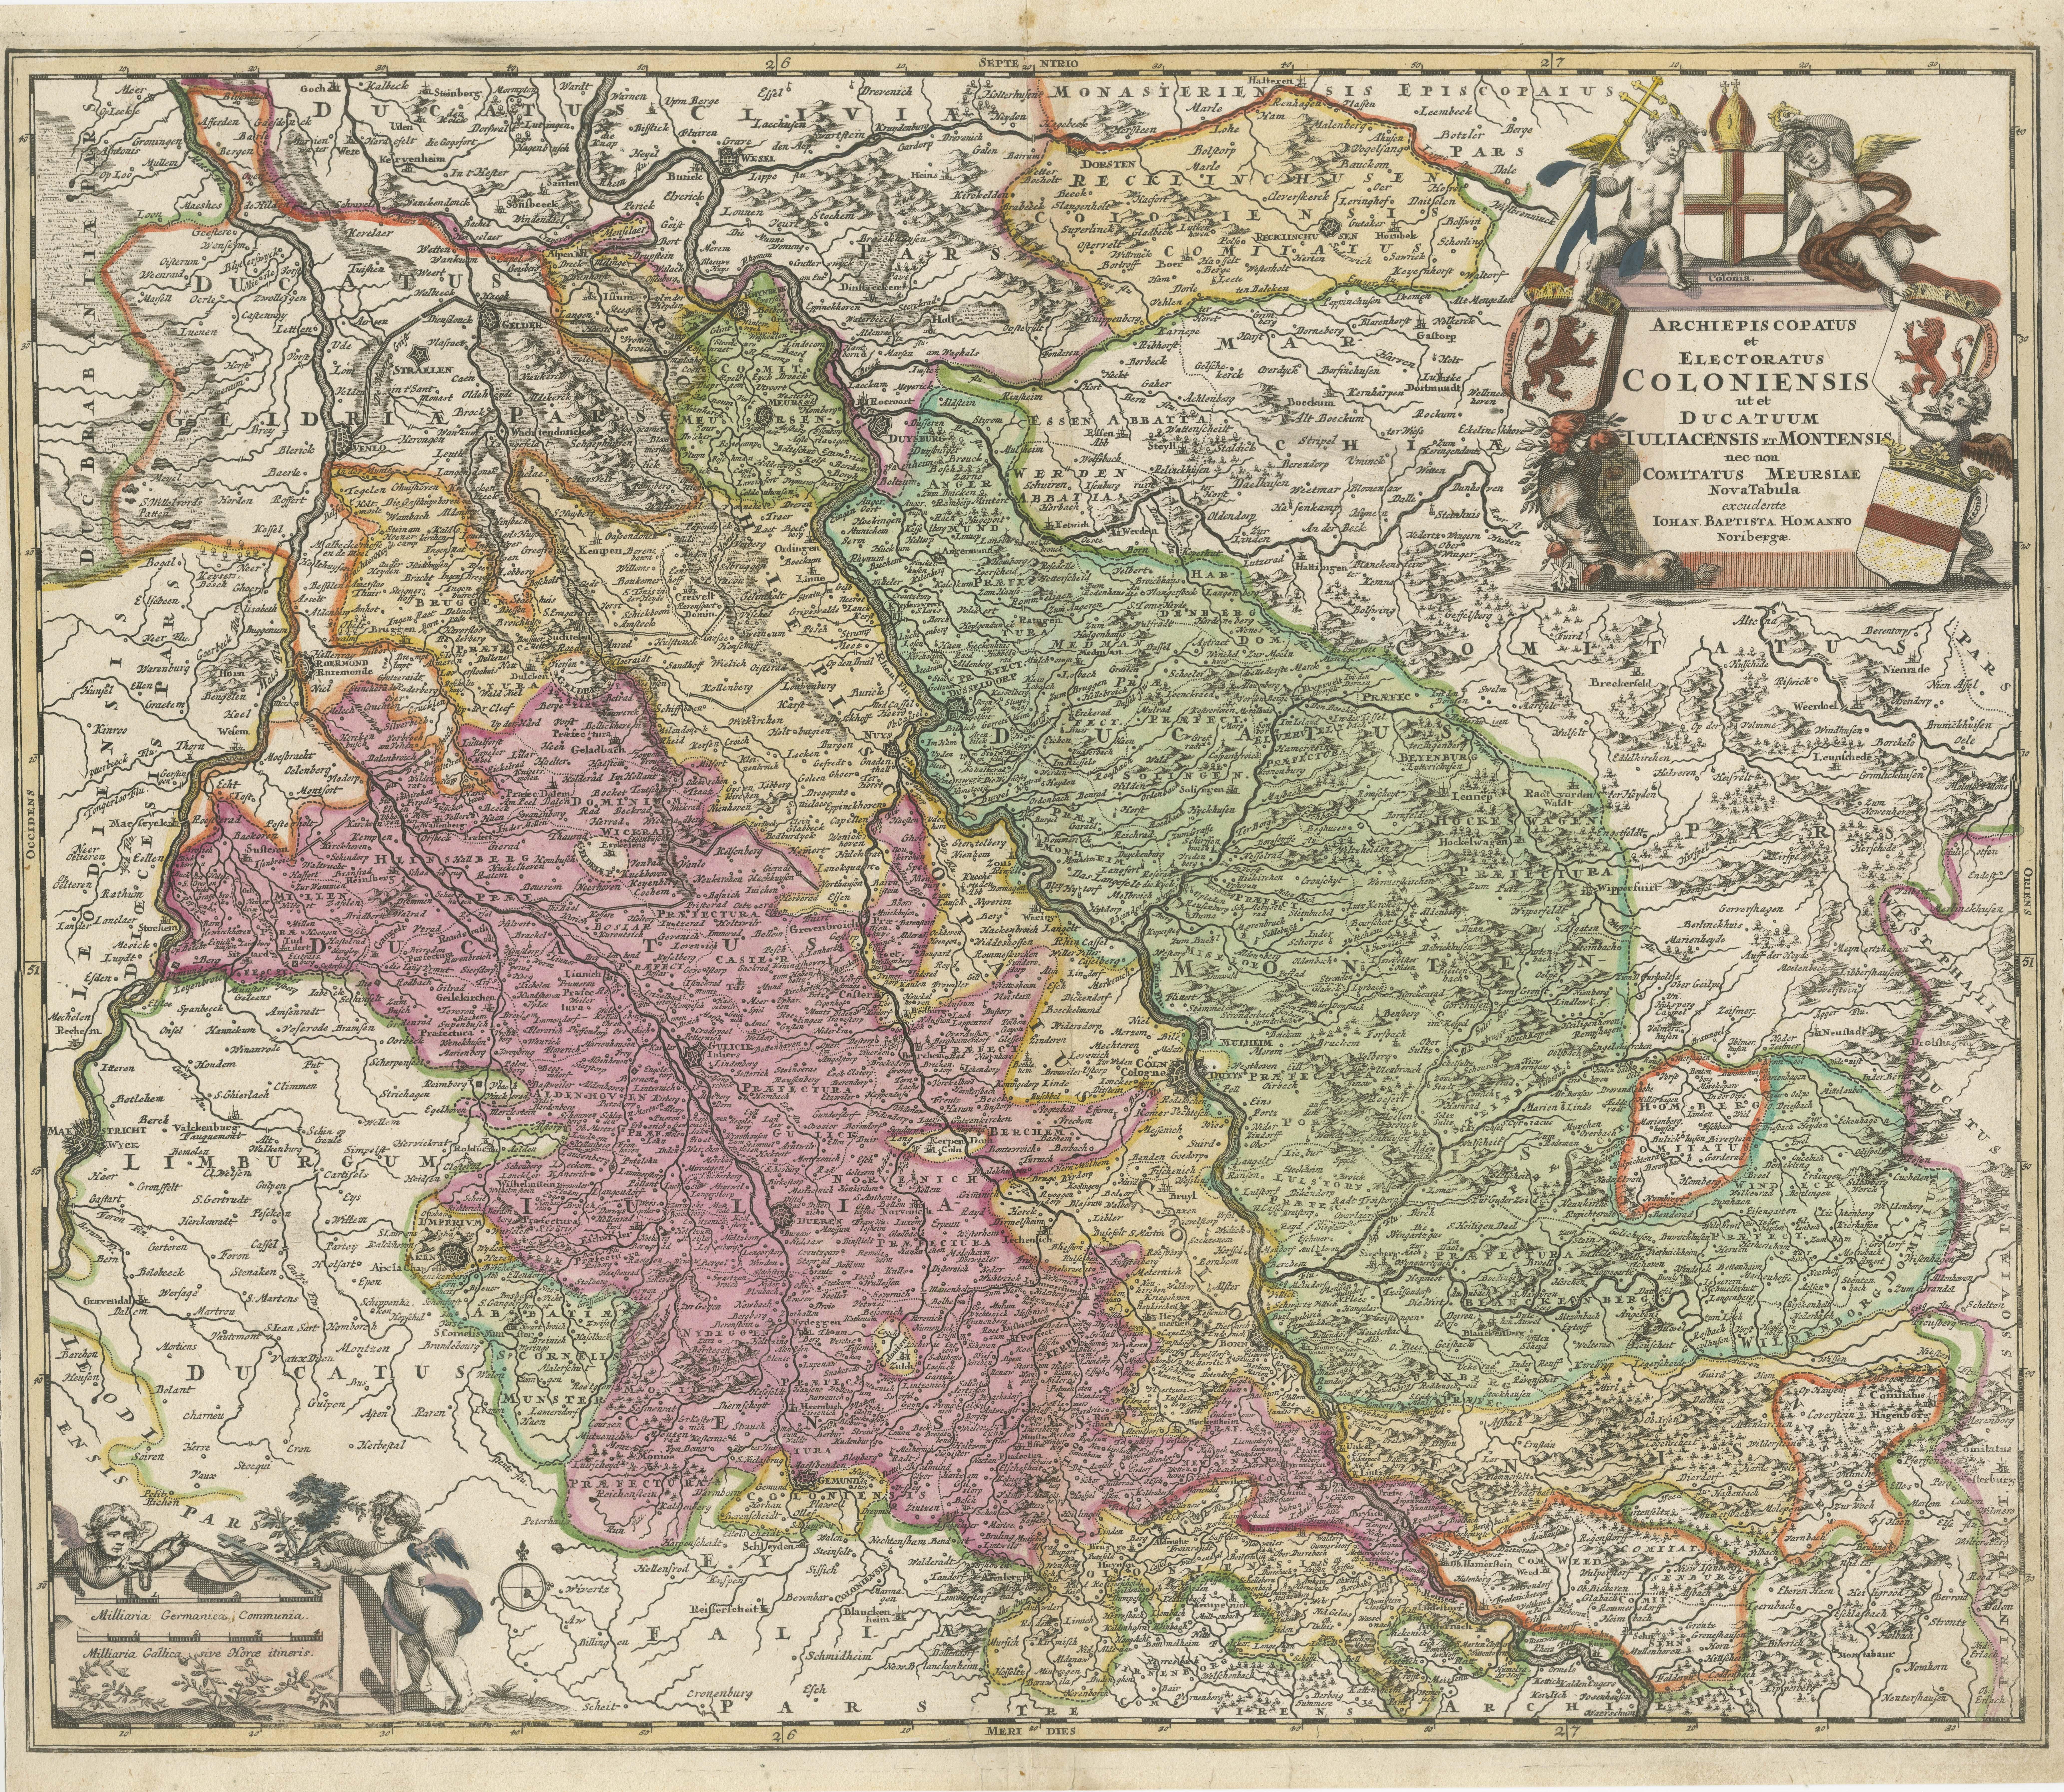 Antique map titled 'Archiepsiscopatus et Electoratus Coloniensis (..)'. Original antique map of the Rhine river, centered on Cologne, Germany. The Rhine River cuts across this map from south of Bonn, centered on Cologne and north to Wesel. The map